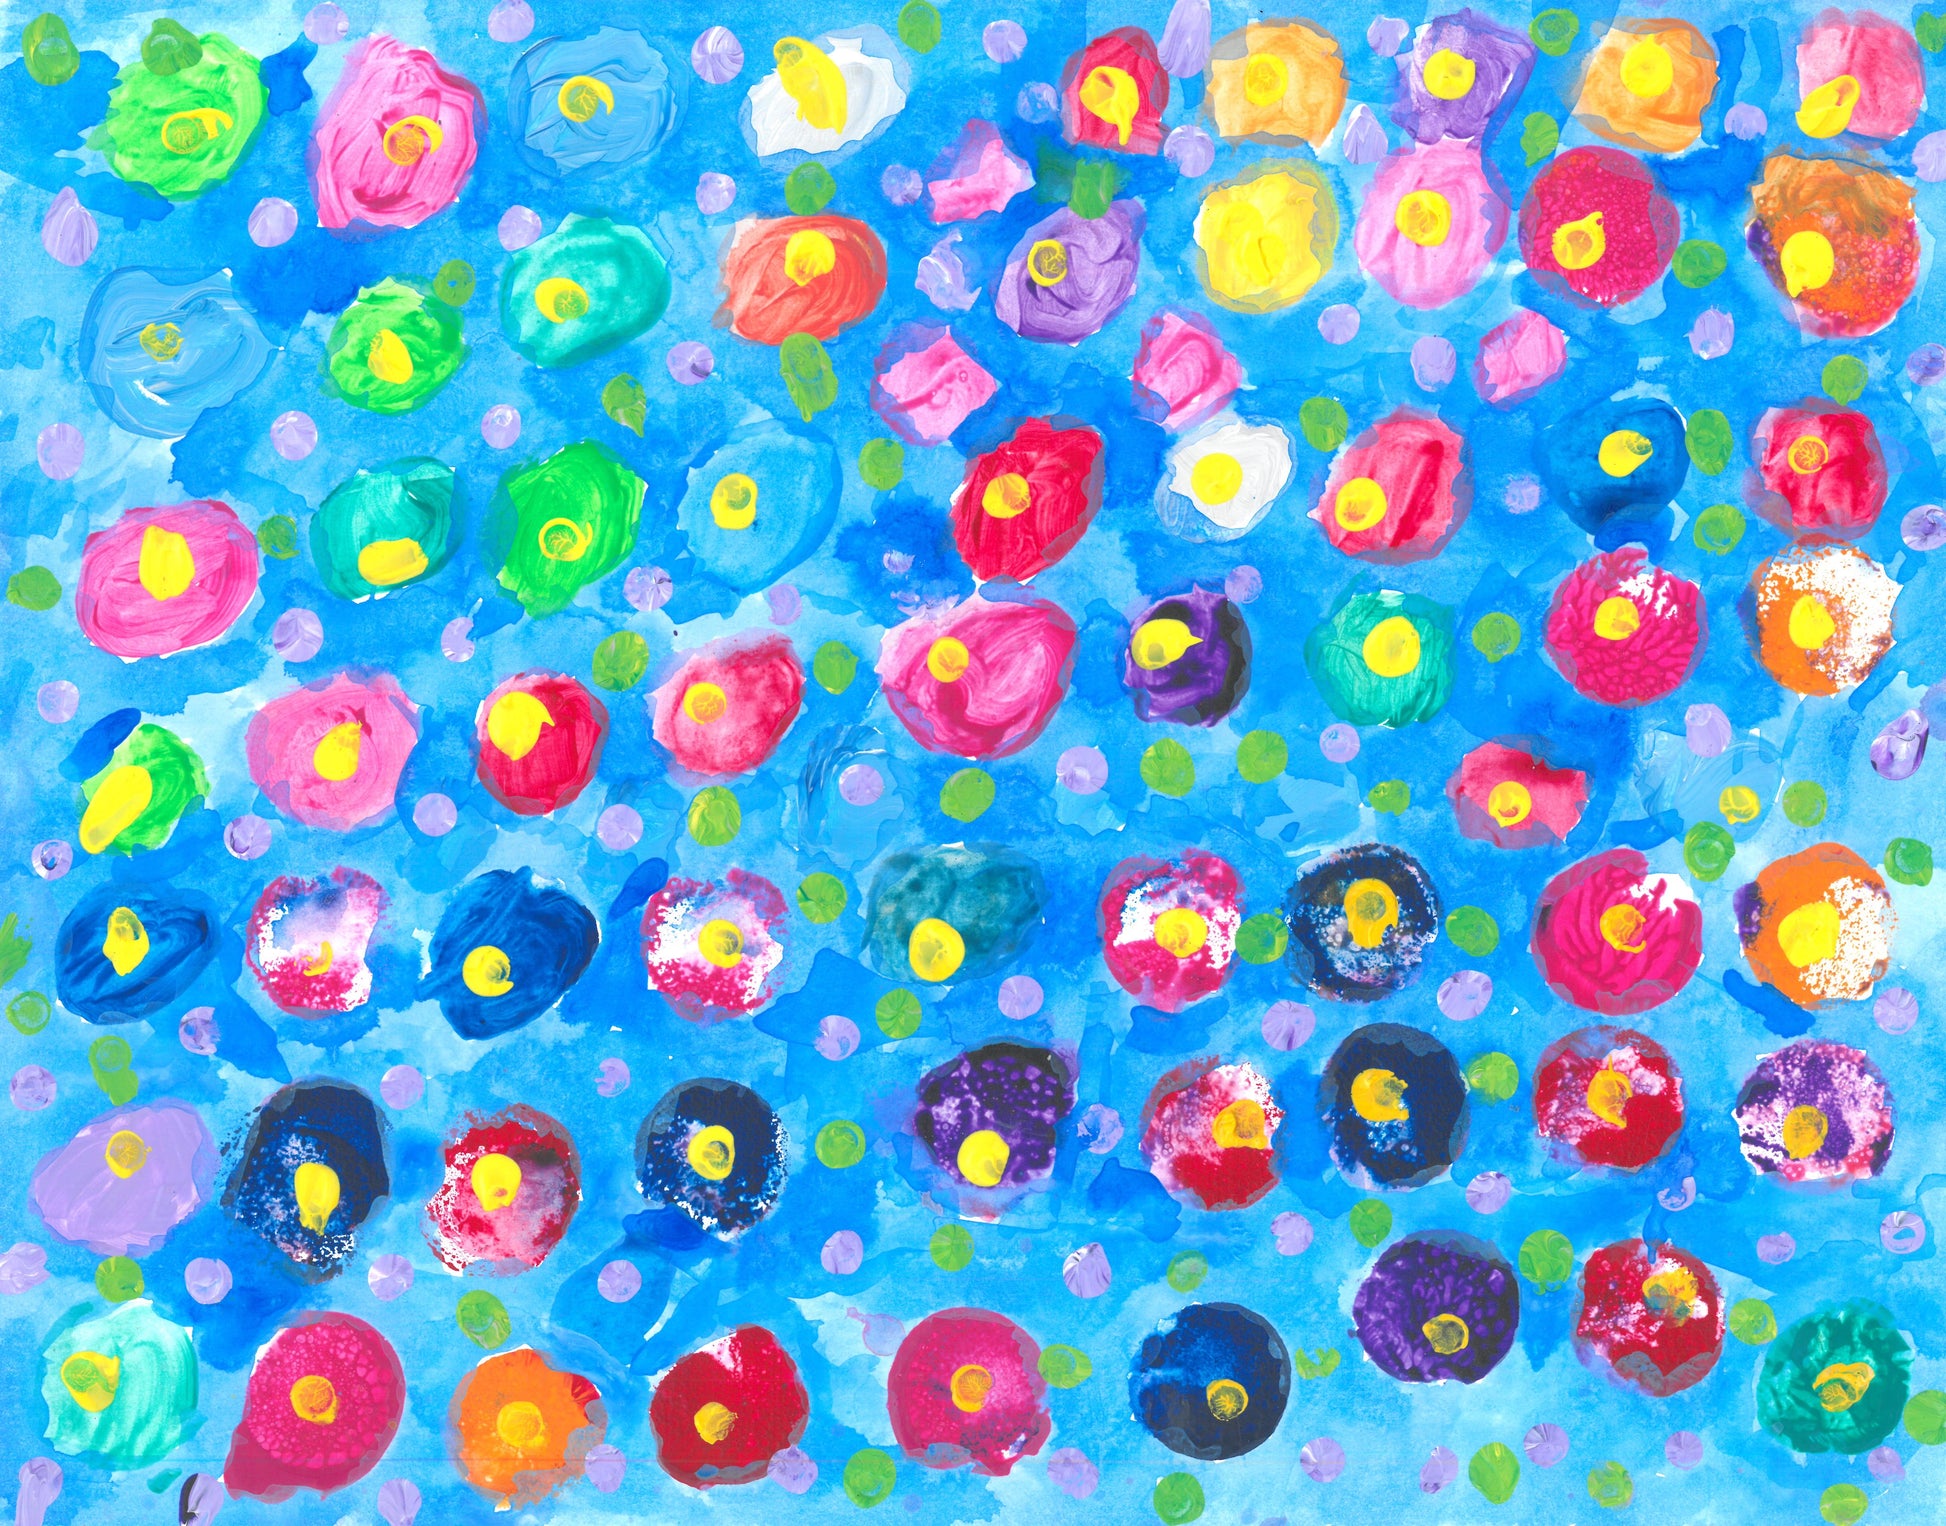 This is a painting with a blue background and multicolored dots with yellow centers. The colors include: purple, pink, orange, and blue.